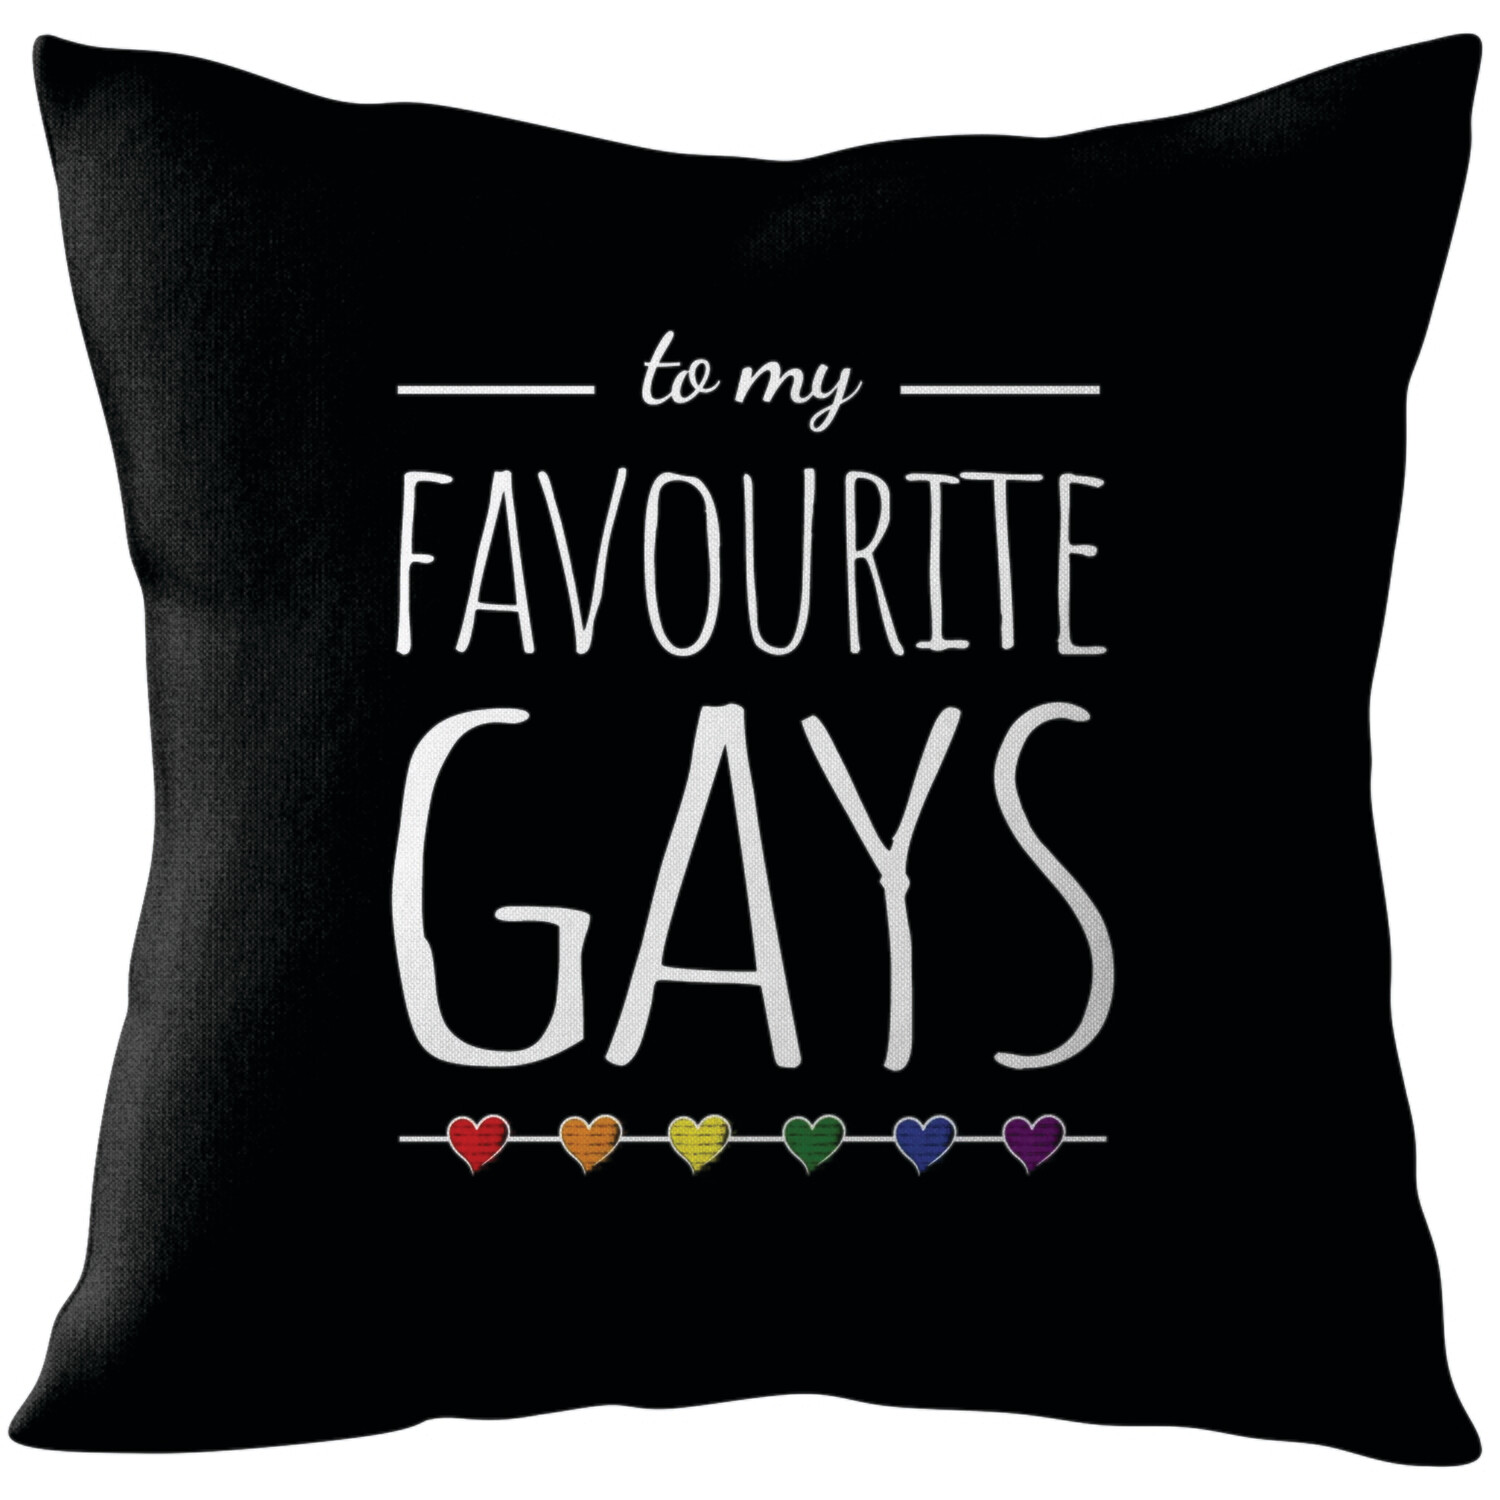 To my Favourite Gays - Gay Couple Cushion